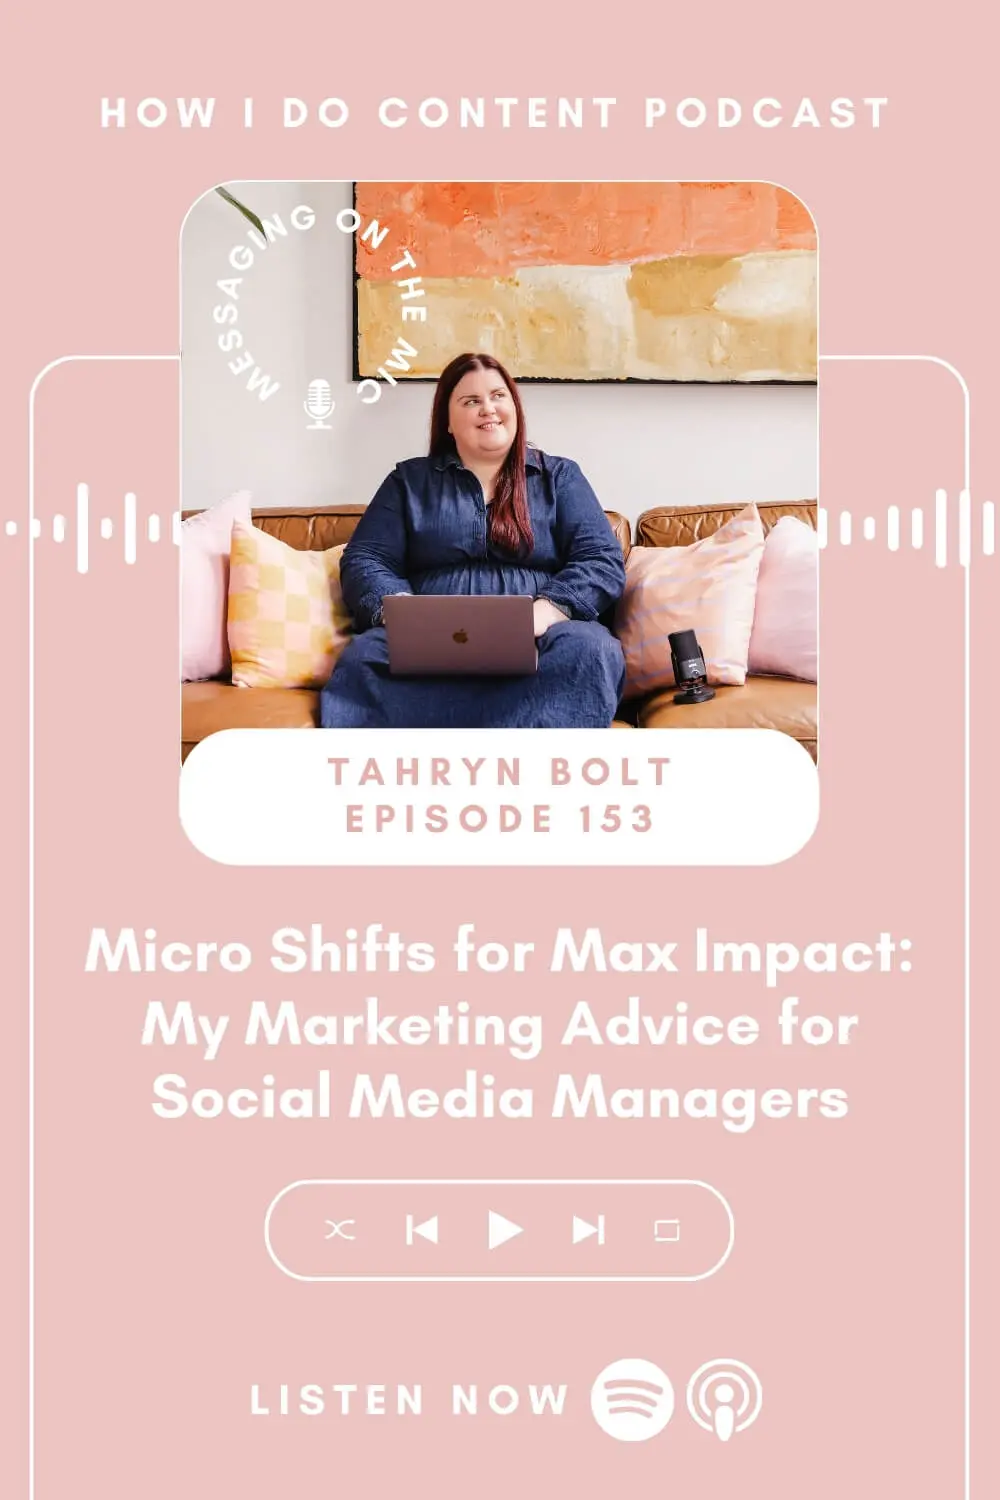 Micro Shifts for Max Impact: My Marketing Advice for Social Media Managers